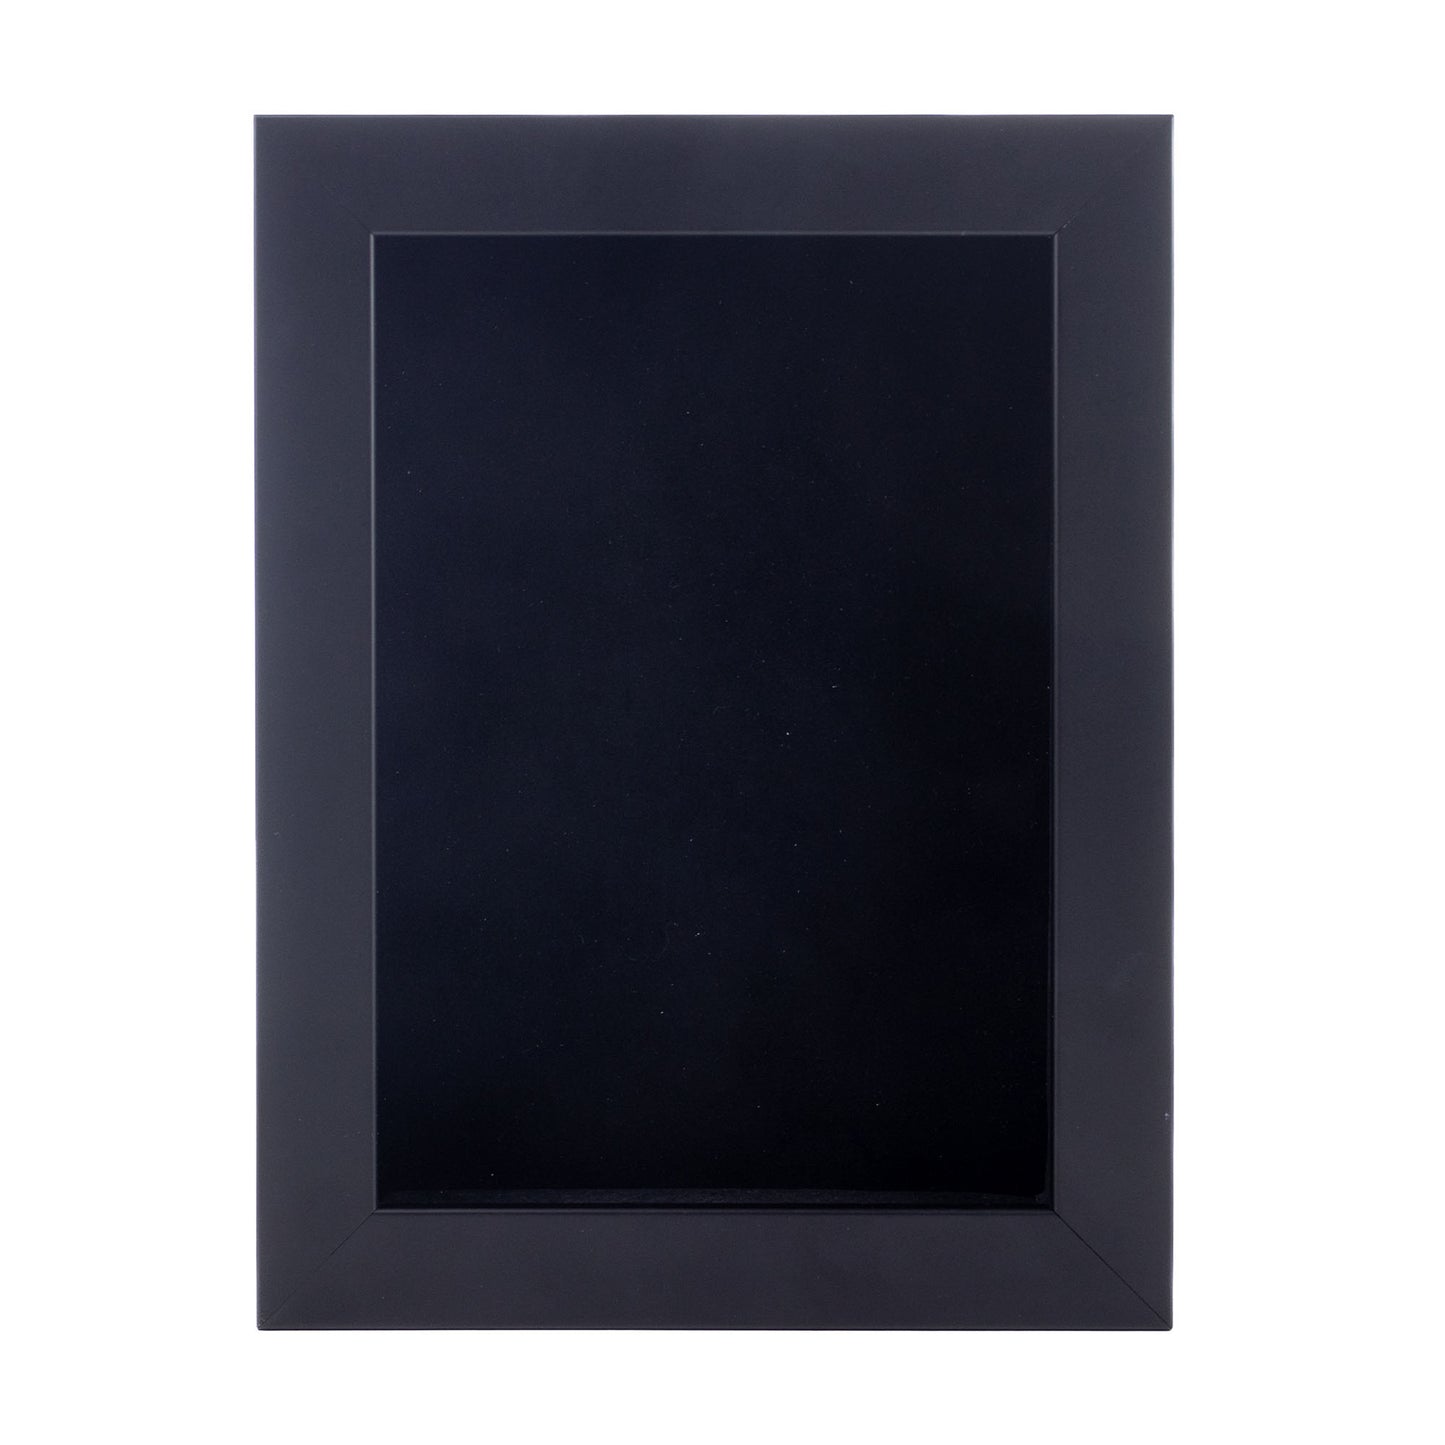 Black Shadow Box Frame With Black Acid-Free Suede Backing